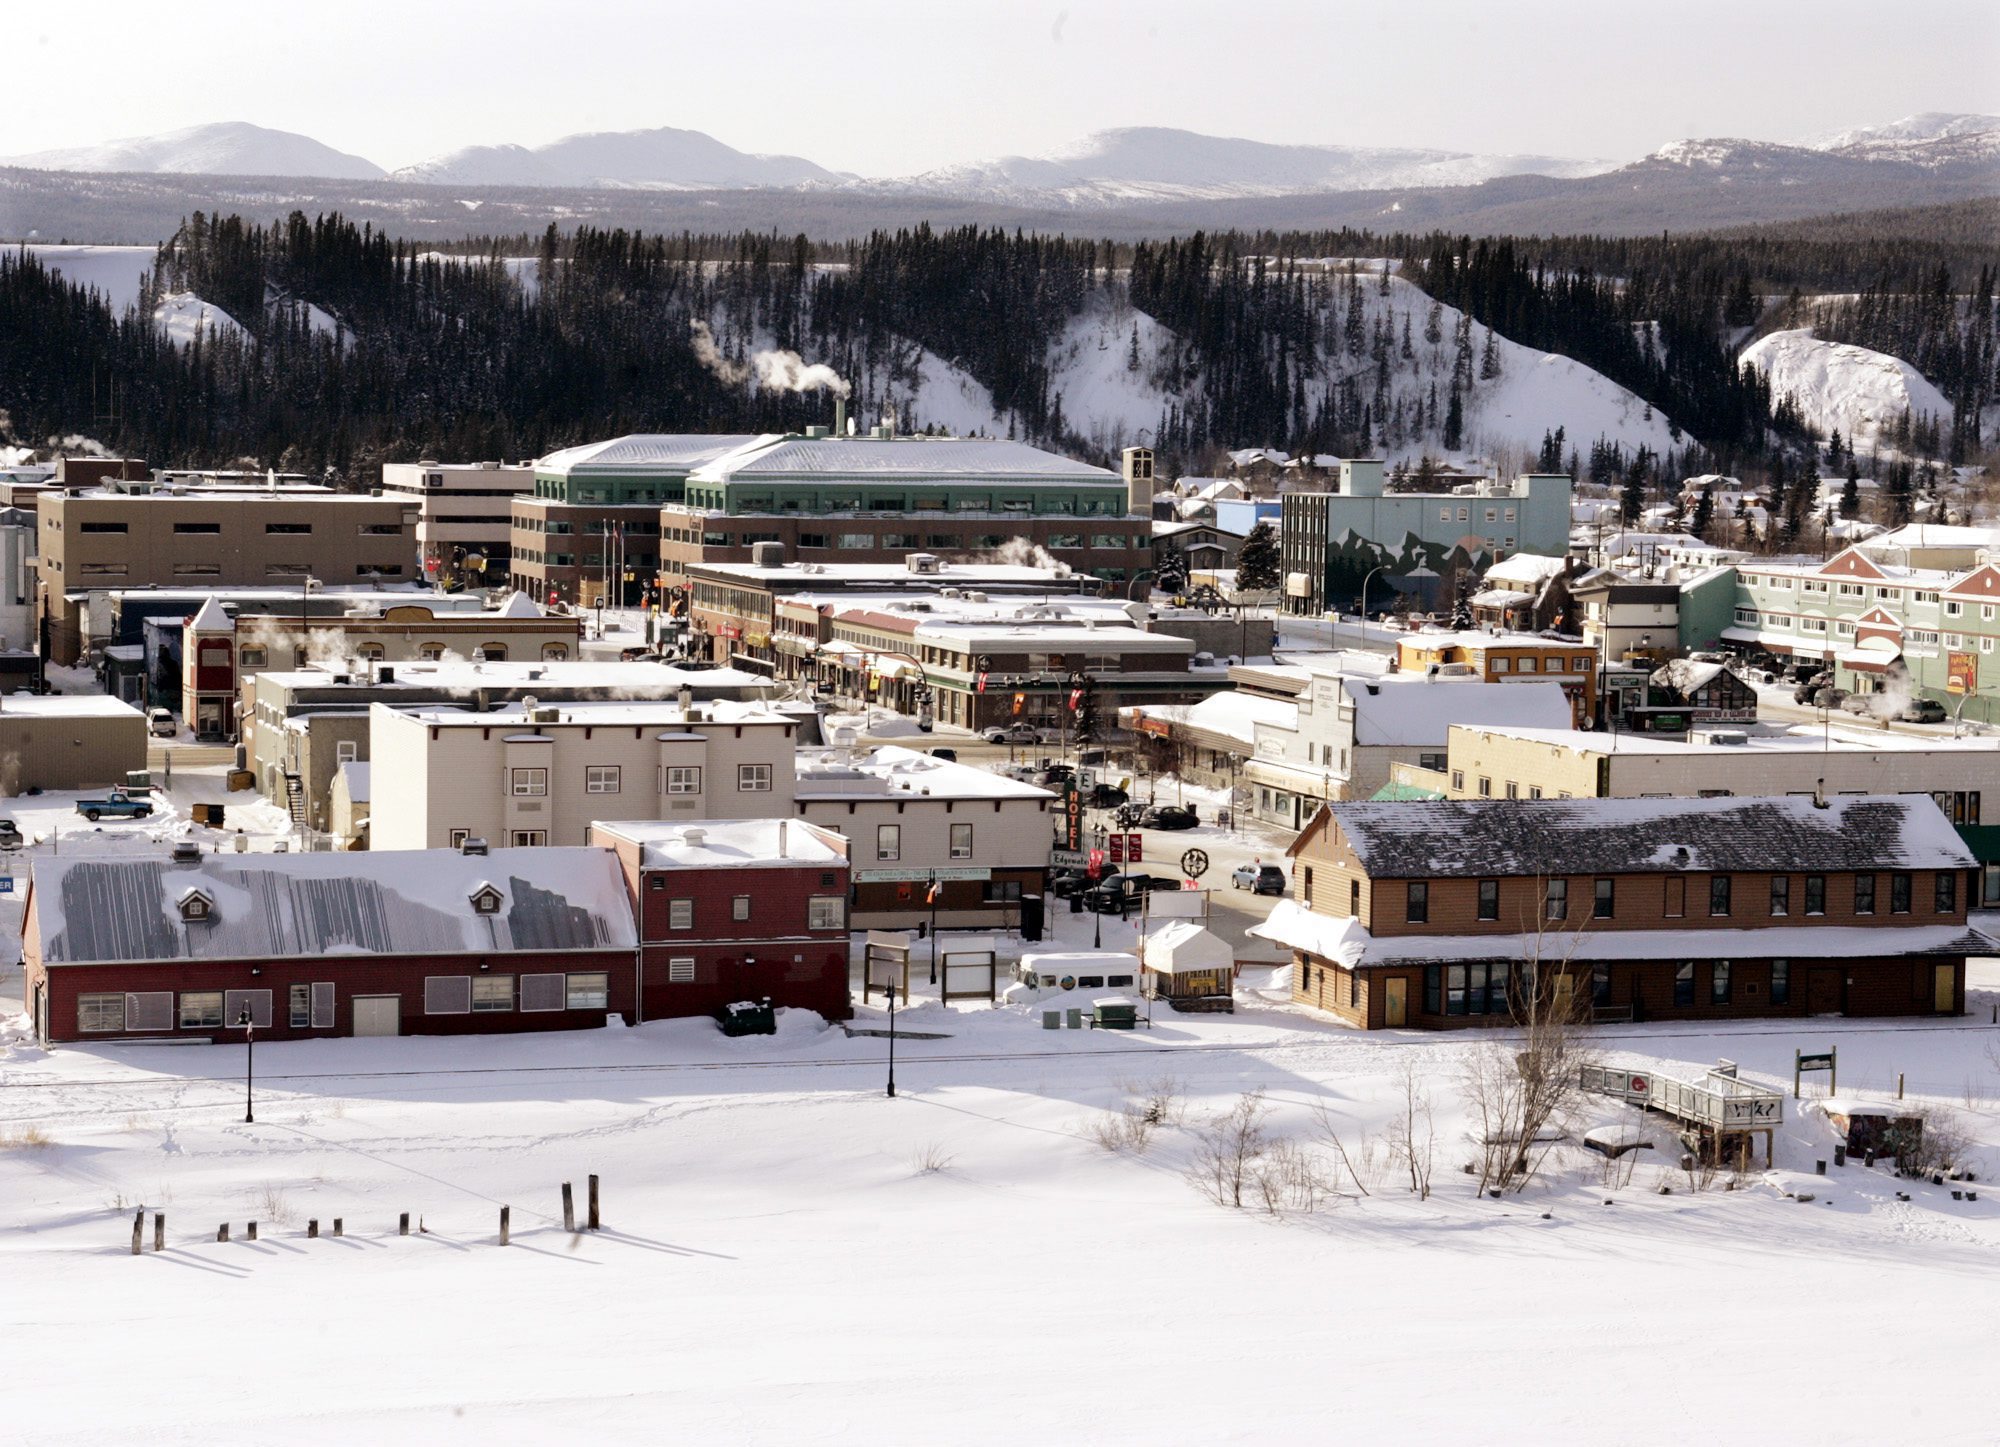 The city of Whitehorse, in Canada's northwestern Yukon territory. Whitehorse's 911 service is available within an 80 kilometre radius of the city. (The Canadian Press)